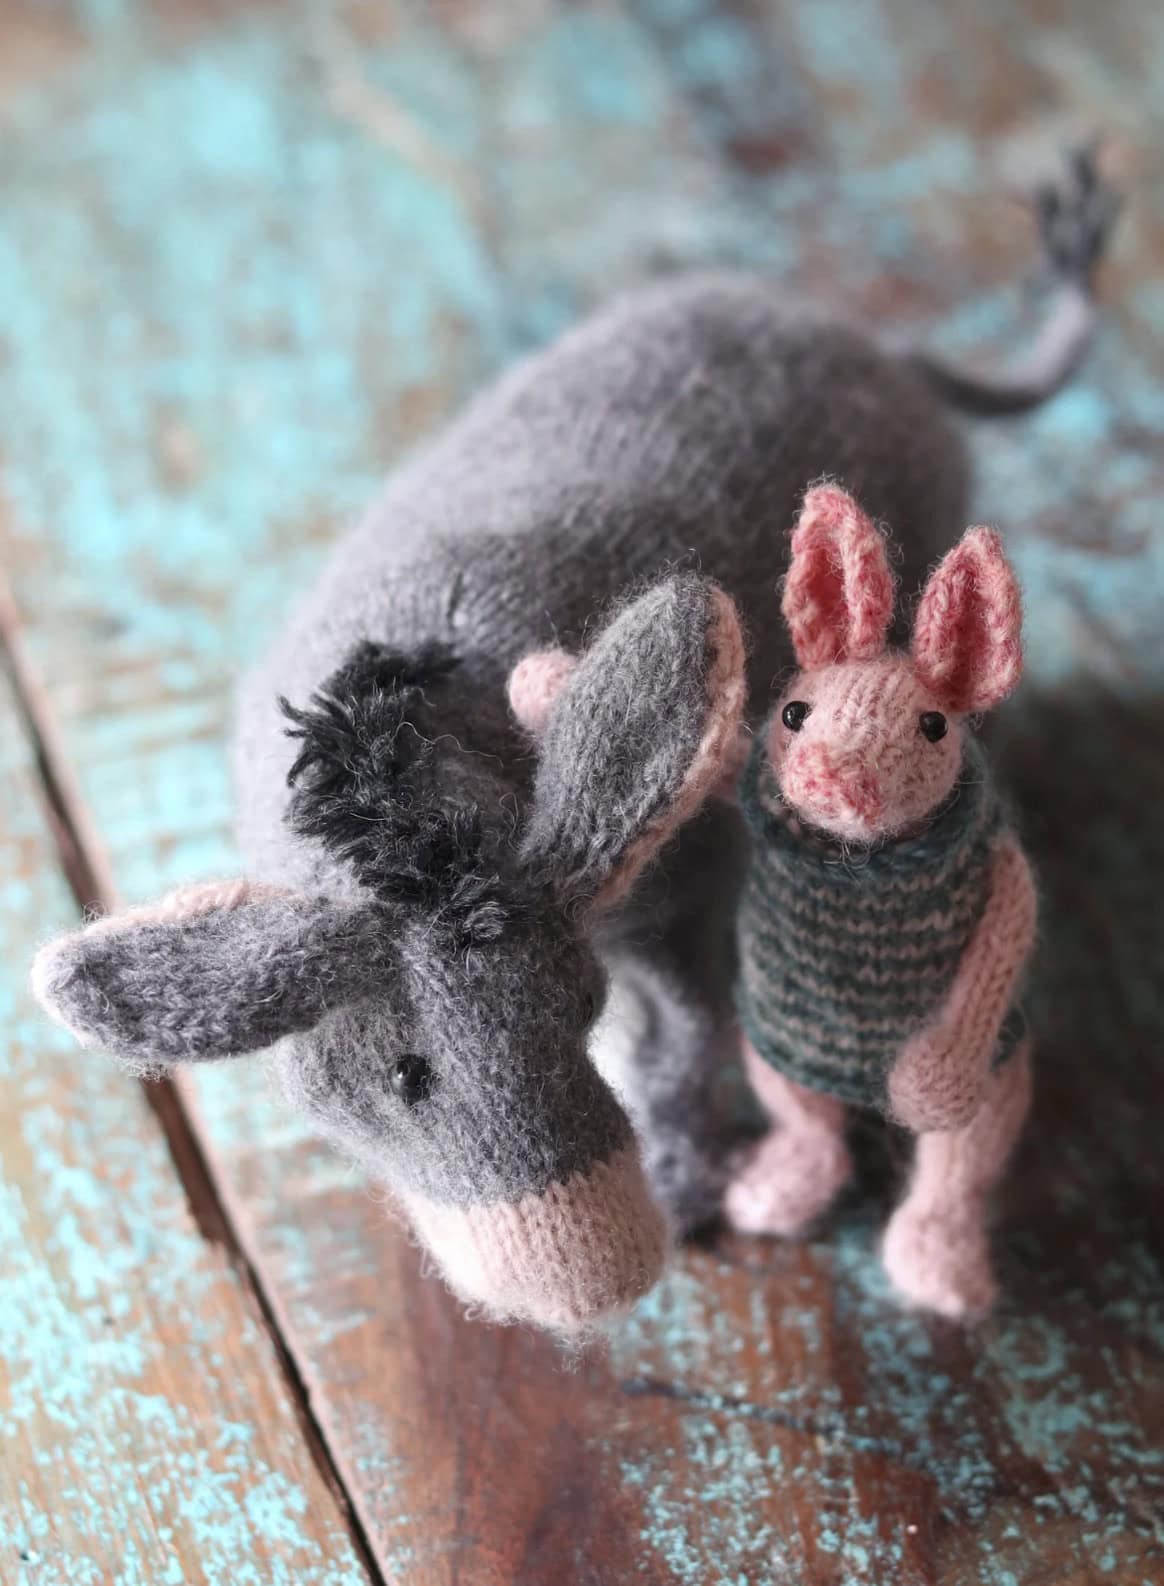 Piglet and Eeyore knitting patterns by Claire Garland aka Dot Pebbles Knits - part of her Winnie the Pooh collection that includes Eeyore and Honey Bear inspired by Pooh Bear. All lovable and easy to knit. Click through to get your PDF download pattern today and start knitting!